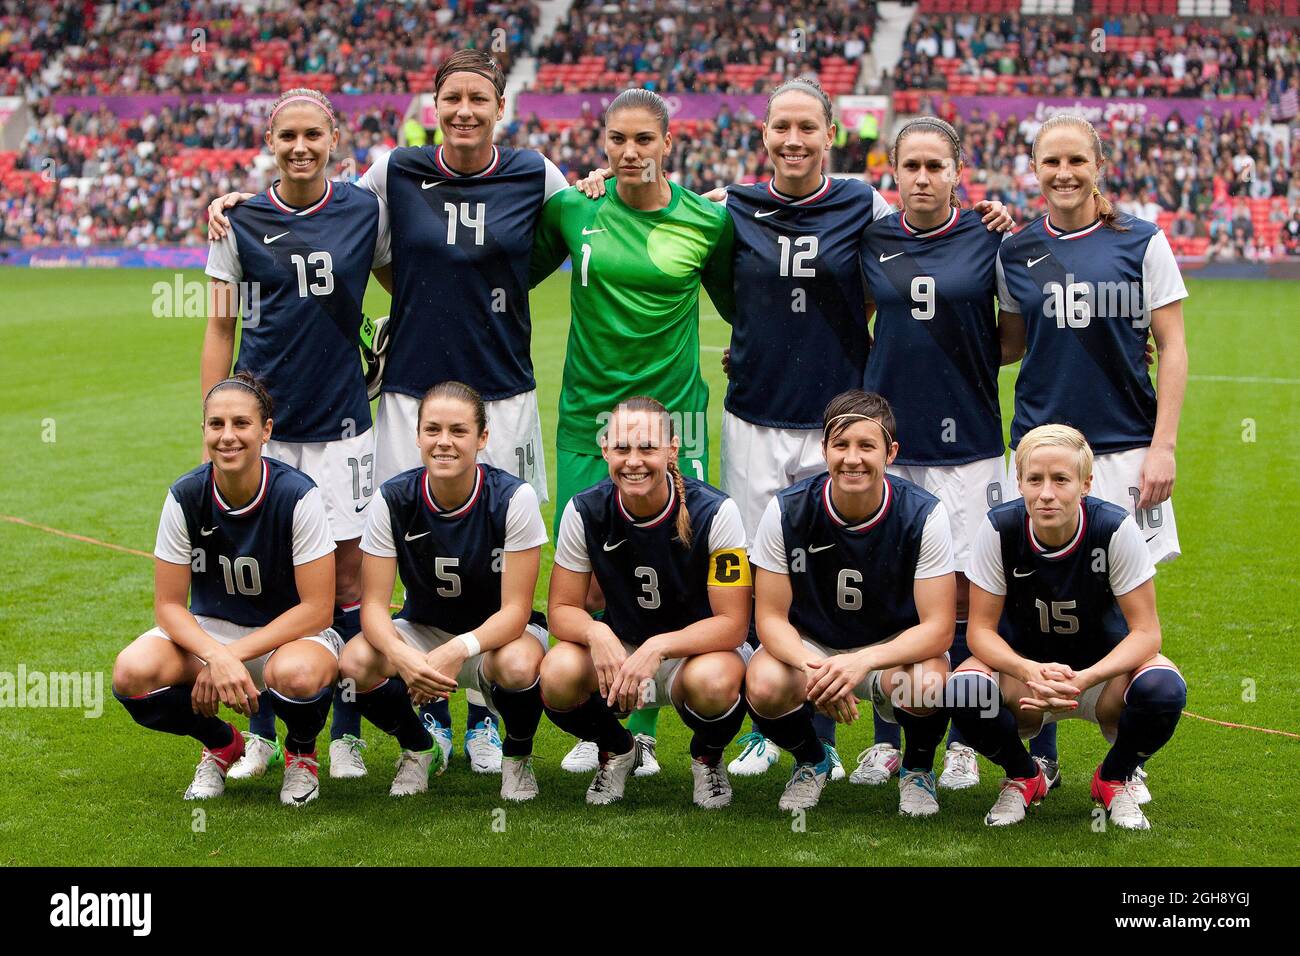 The USA team group during the Olympic 2012 Group G women's match between USA and North Korea at Old Trafford in Manchester, United Kingdom on the 31st July 2012. Stock Photo